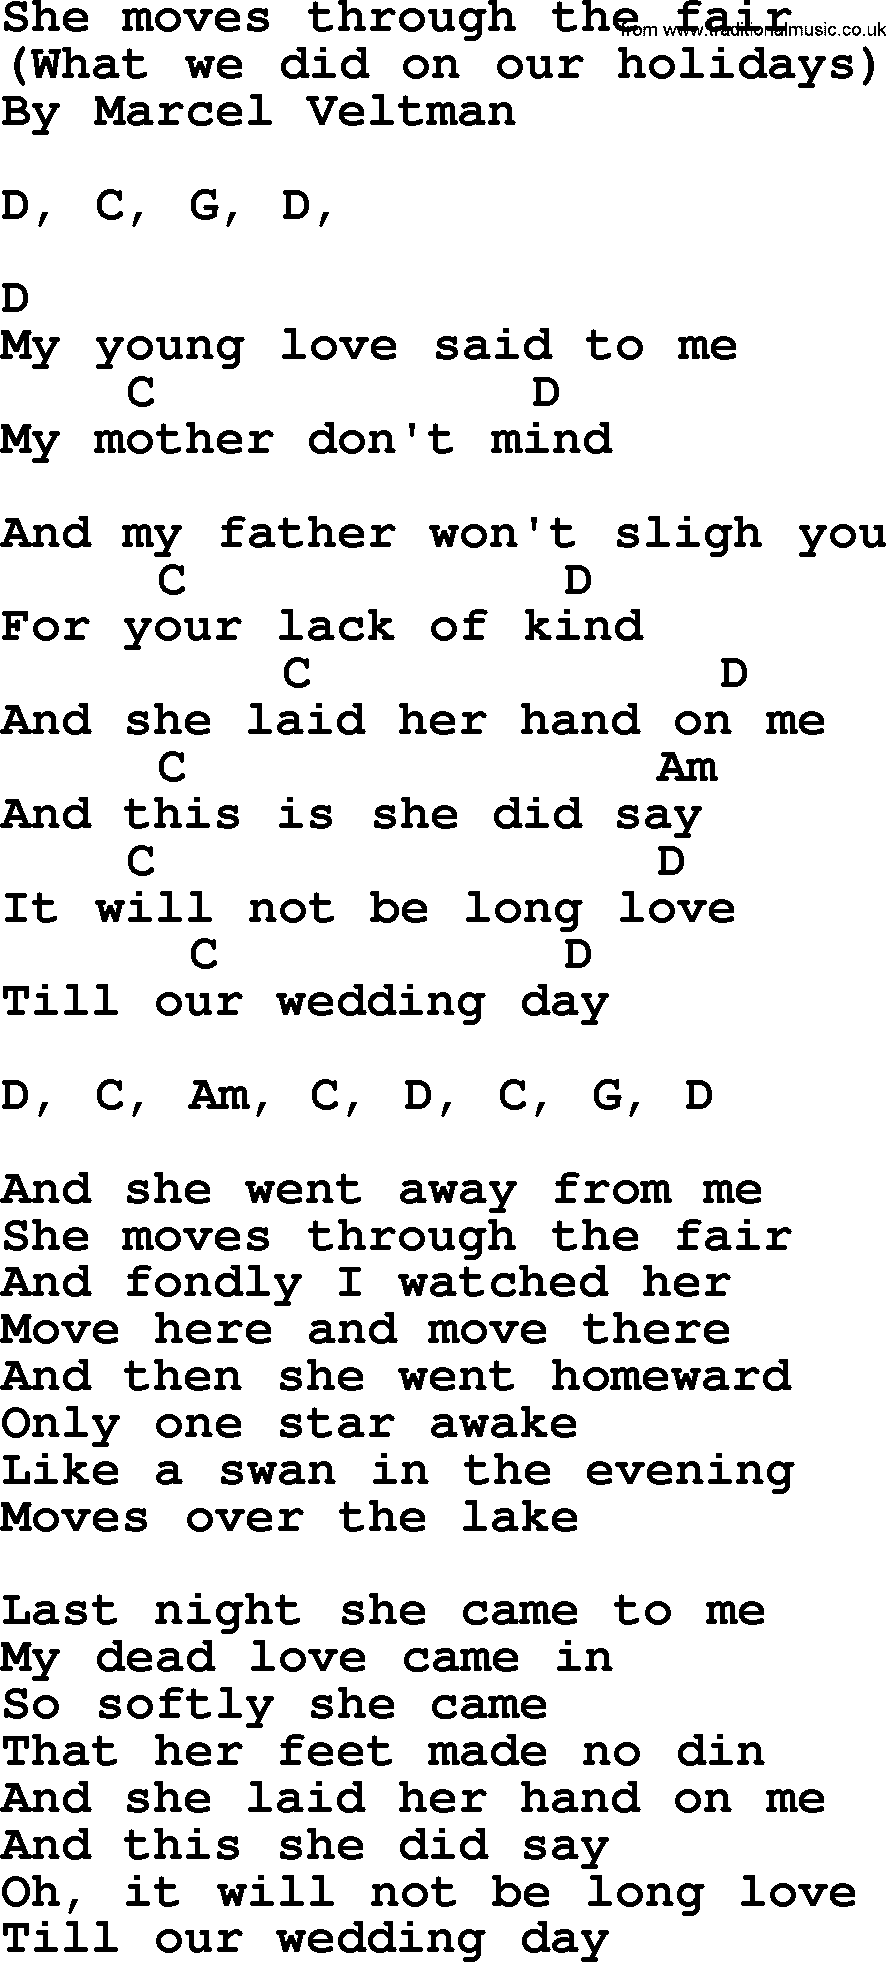 Top 1000 Most Popular Folk and Old-time Songs: She Moves Through The Fair, lyrics and chords